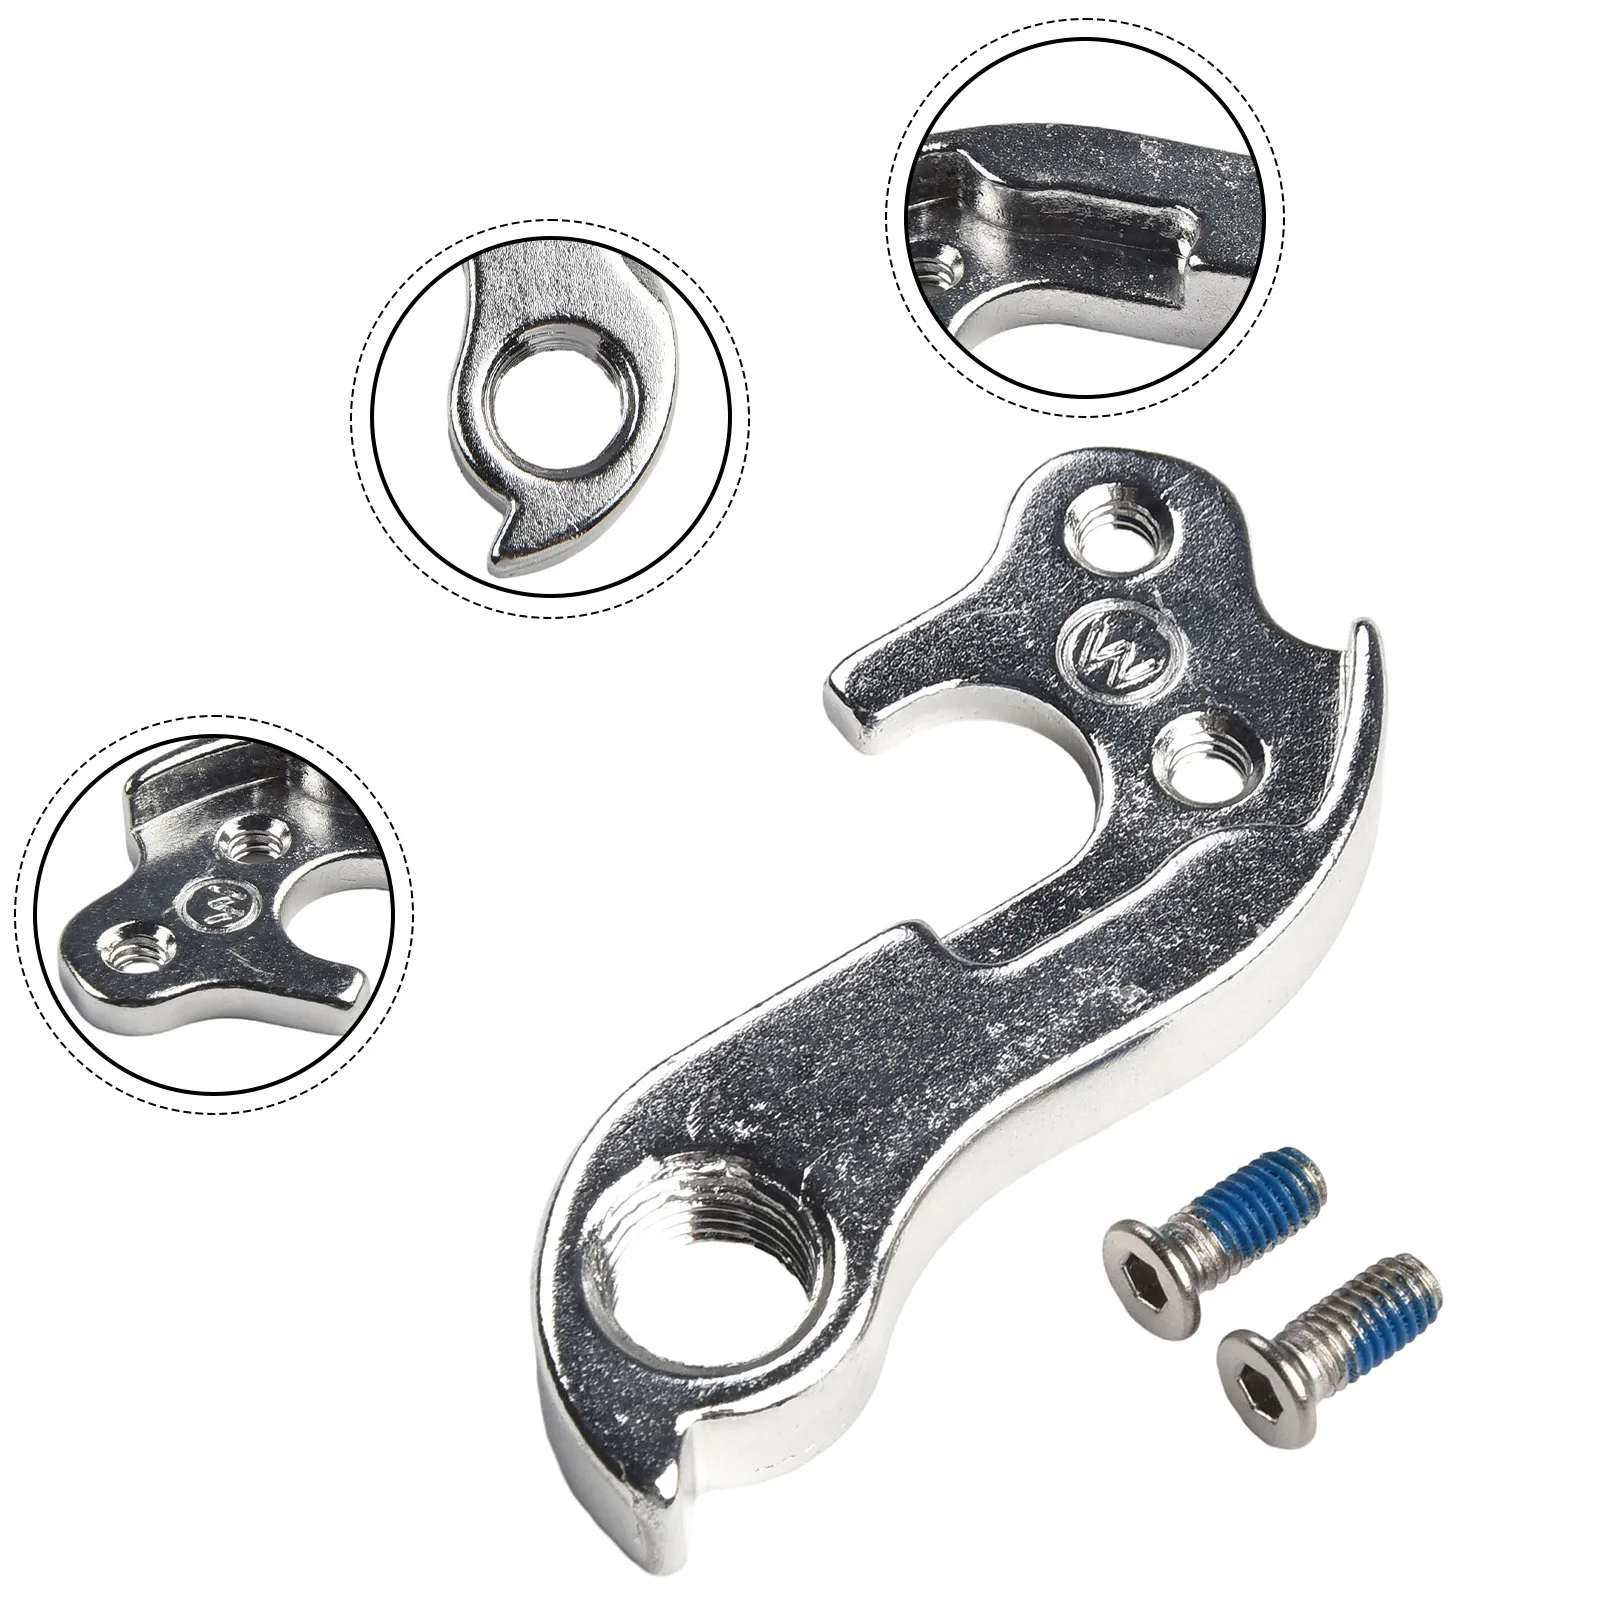 

Achieve Impeccable Gear Shifting with Gear Rear Mech Derailleur Hanger Compatible with Axial SL Cross and CUBE LYNSKEY